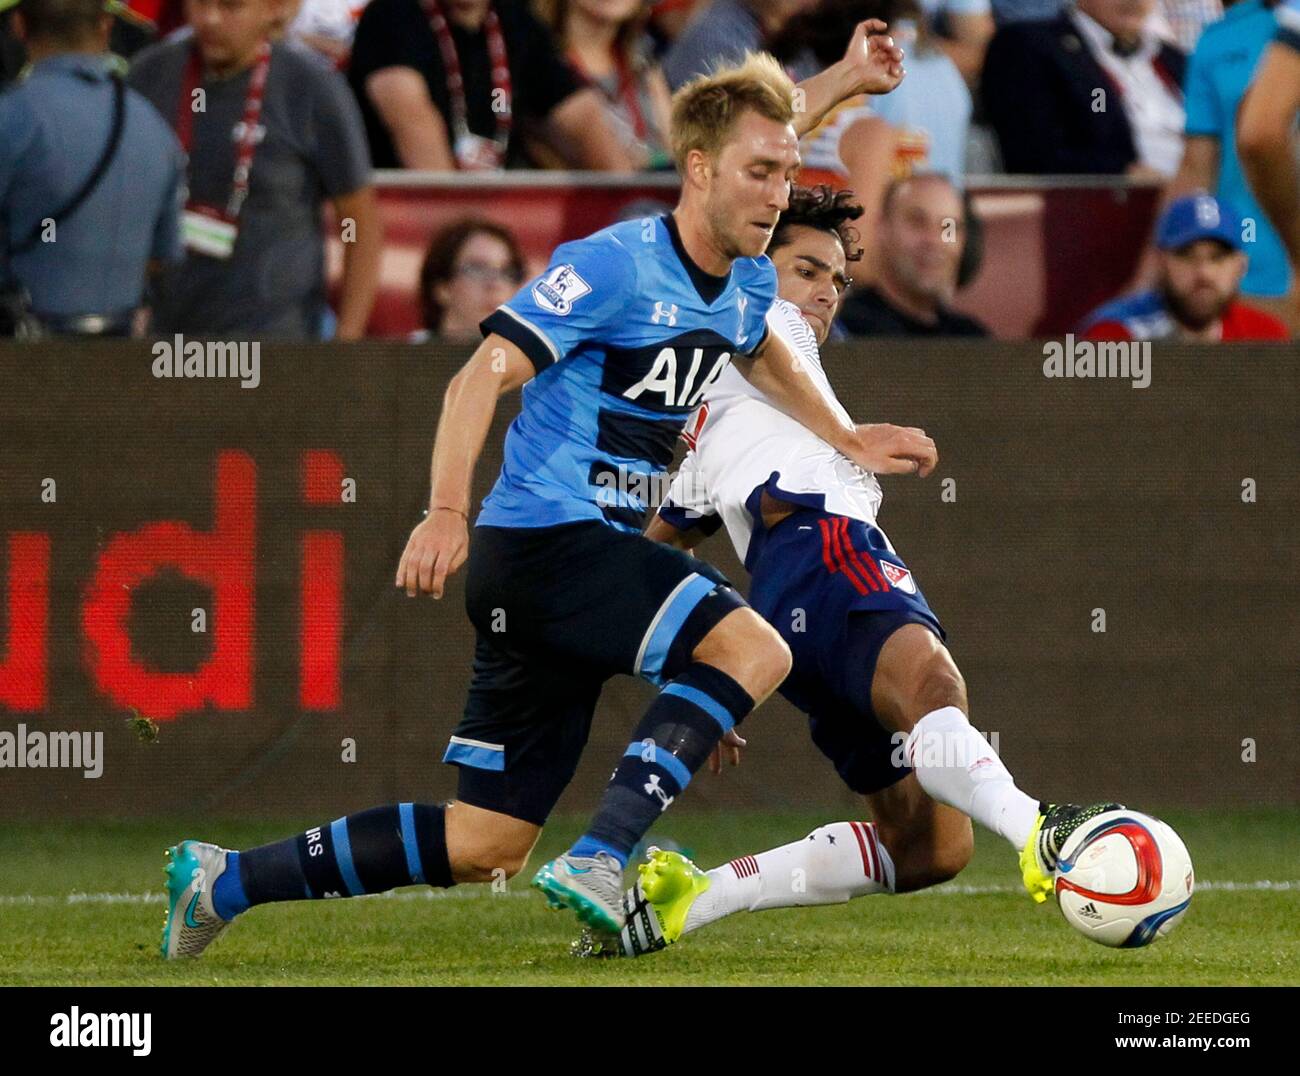 Football - MLS All-Stars v Tottenham Hotspur - AT&T MLS All Stars Game - Pre Season Friendly - Dick's Sporting Goods Park, Colorado, United States of America - 29/7/15  Tottenham's Christian Eriksen in action with MLS All-Star's Tony Beltran  Action Images via Reuters / Rick Wilking  Livepic Stock Photo